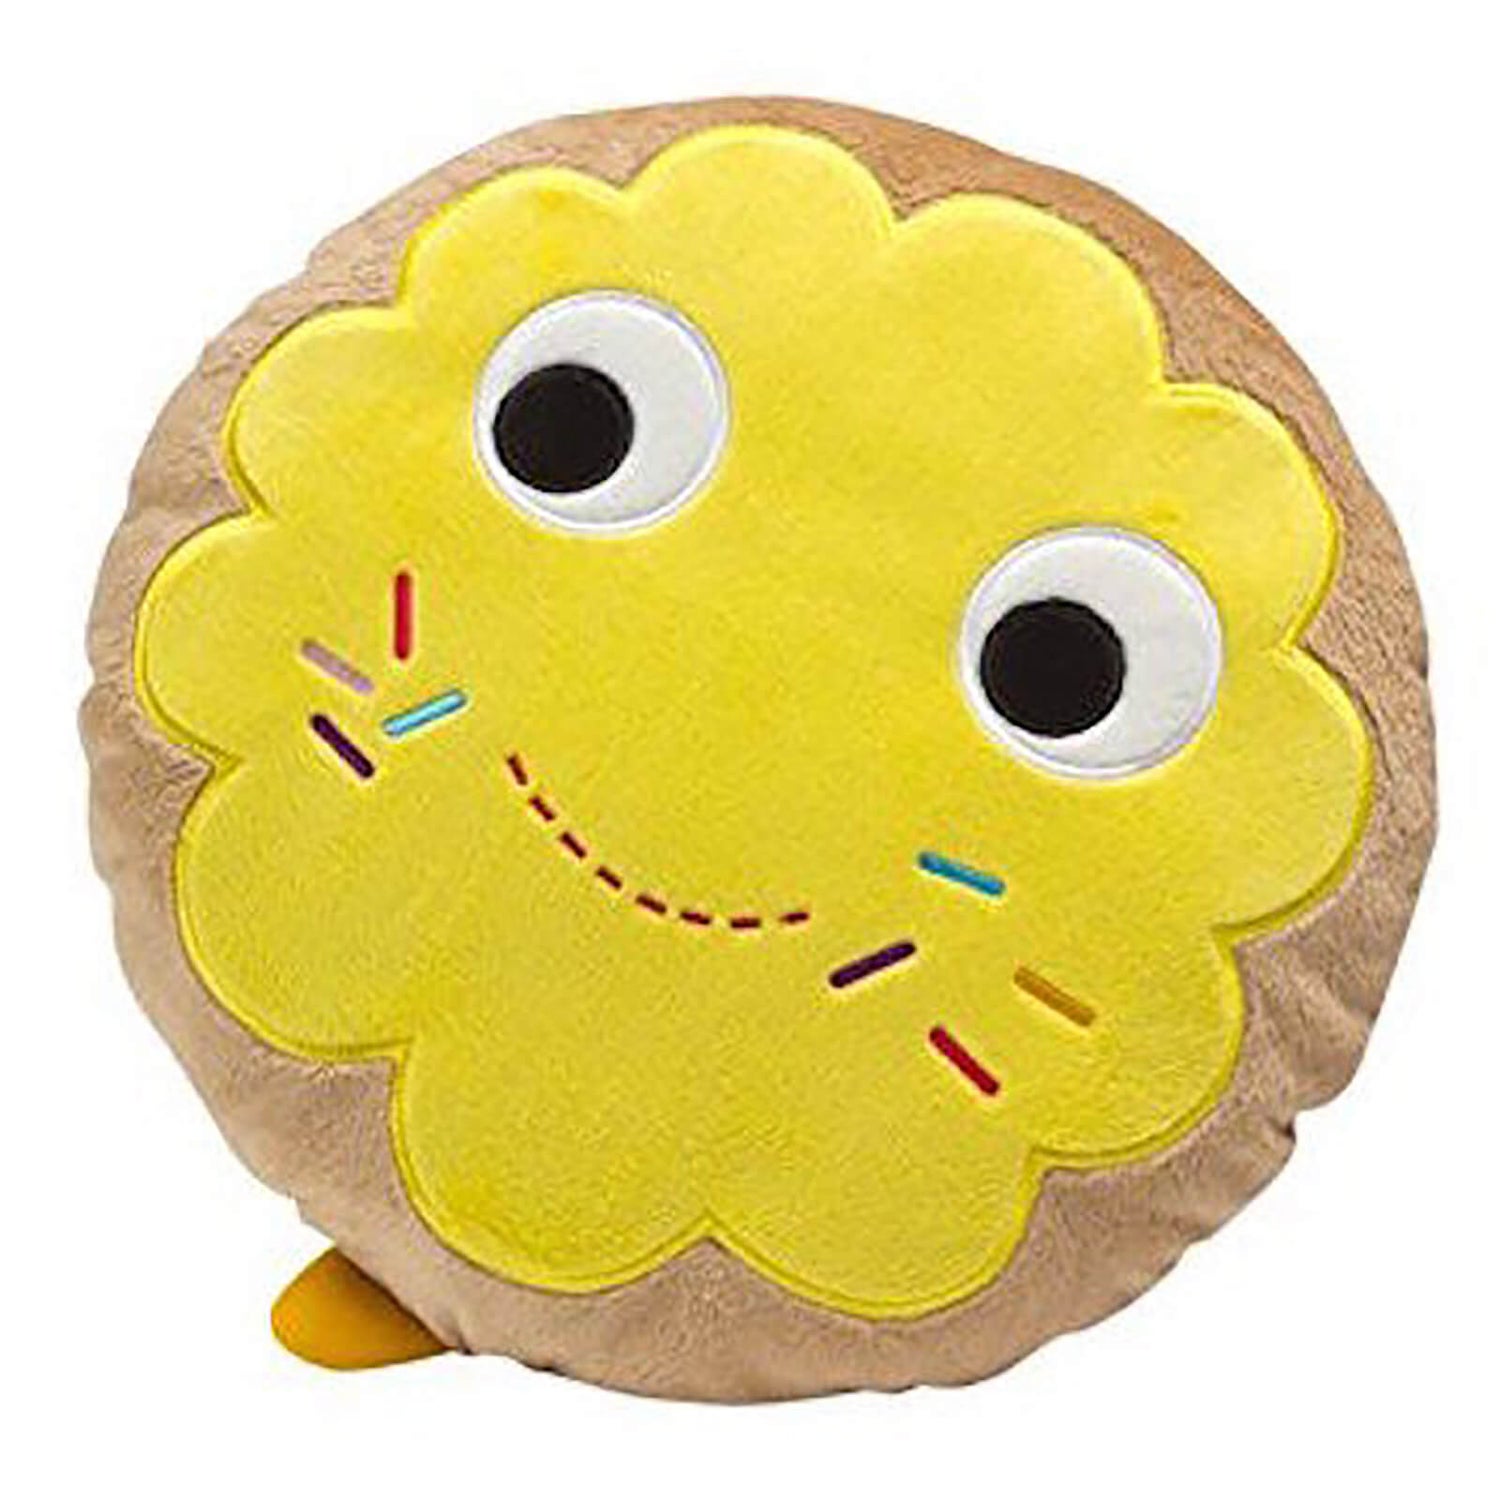 Blox Fruits plush range includes a host of new f-luffy friends